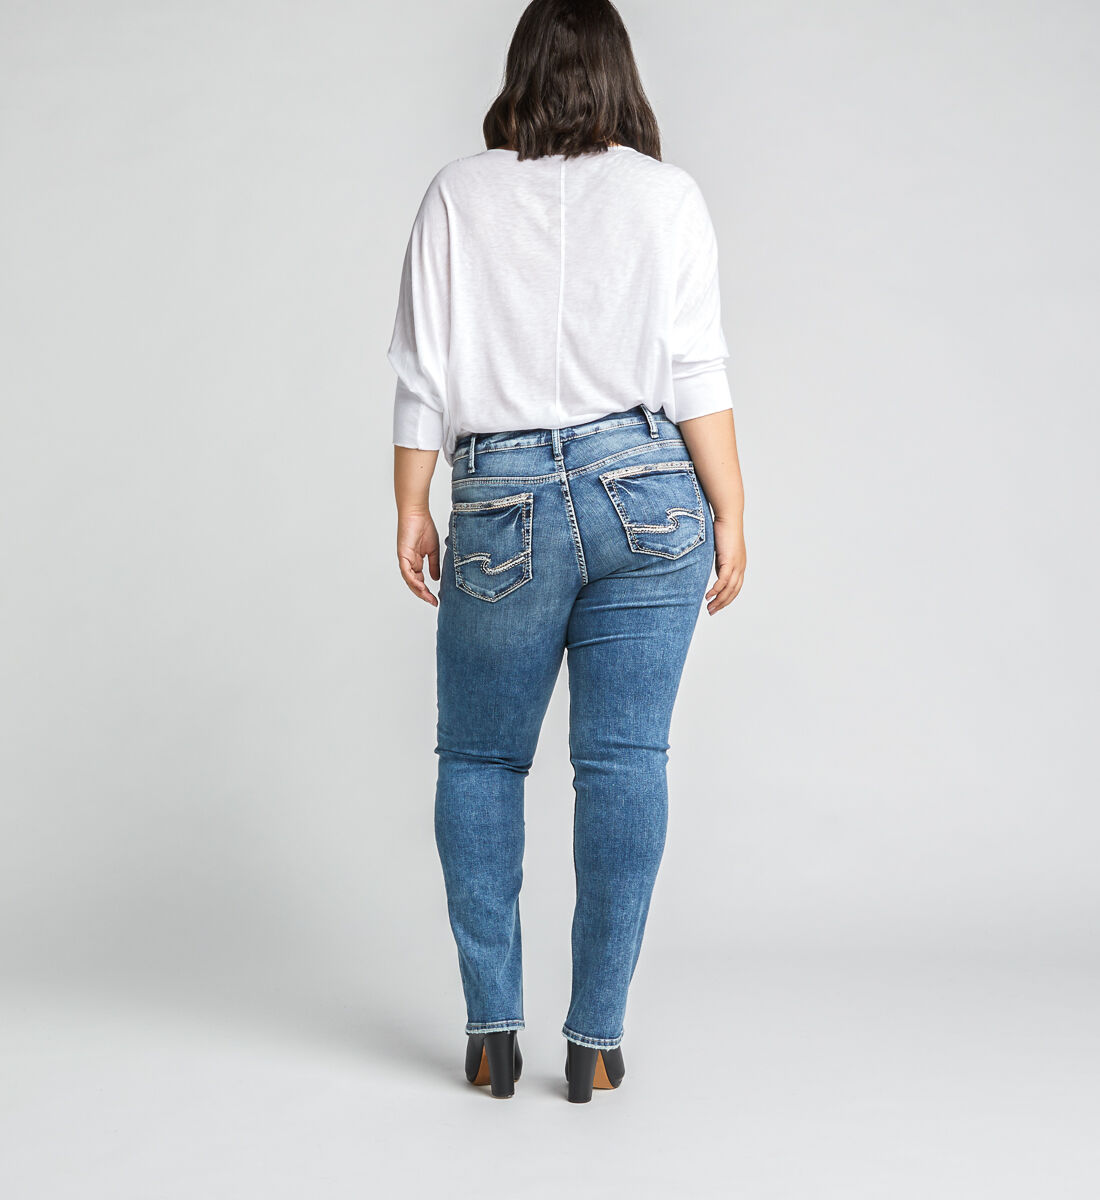 plus size silver jeans canada